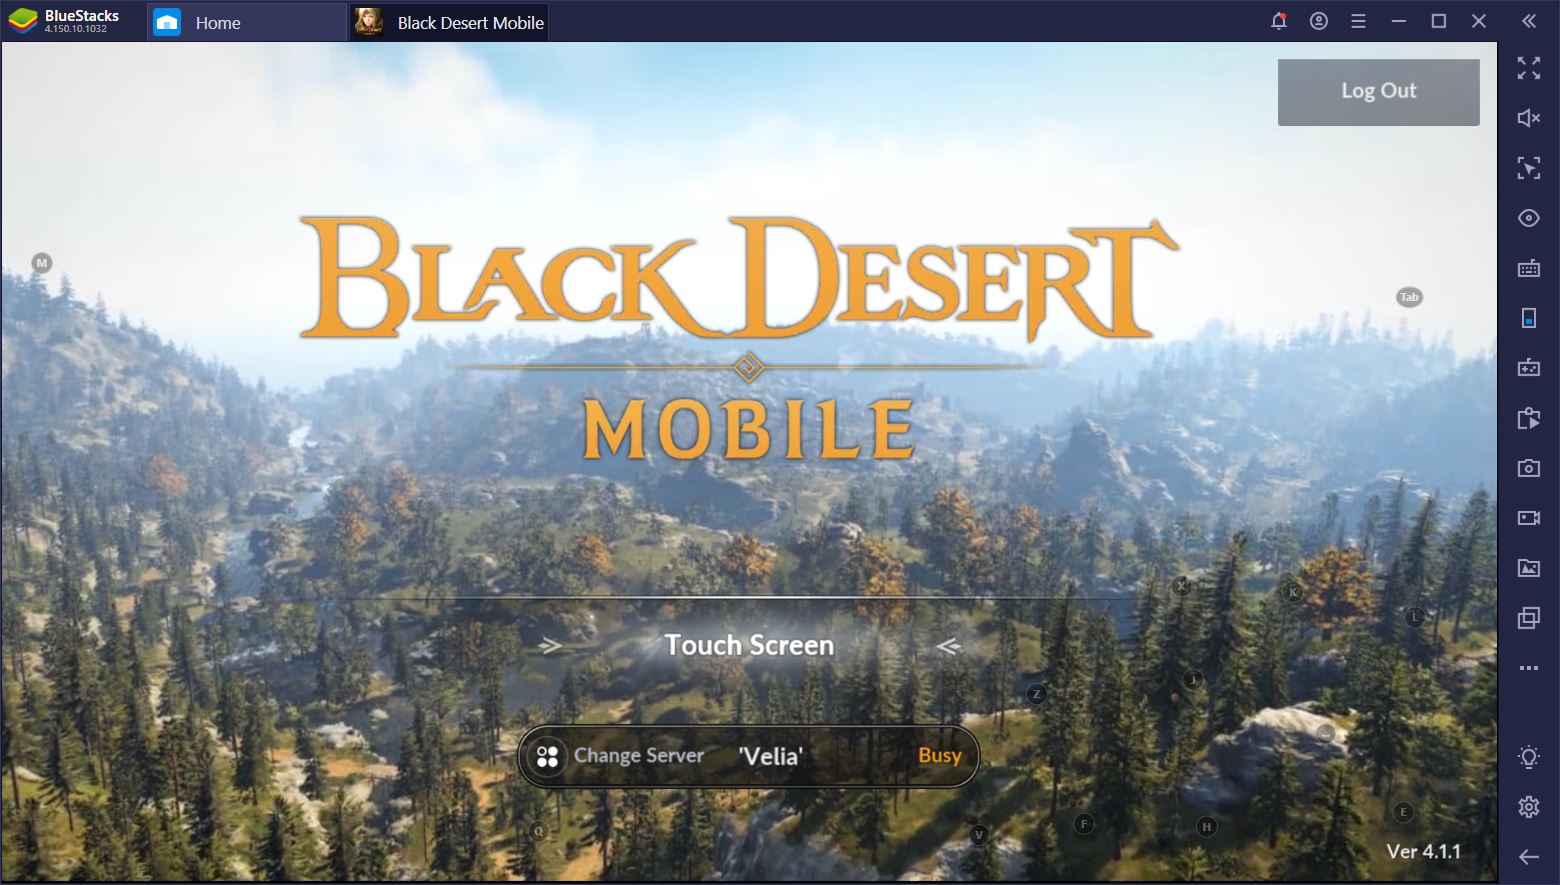 Black Desert Mobile: How to Level Up Quickly